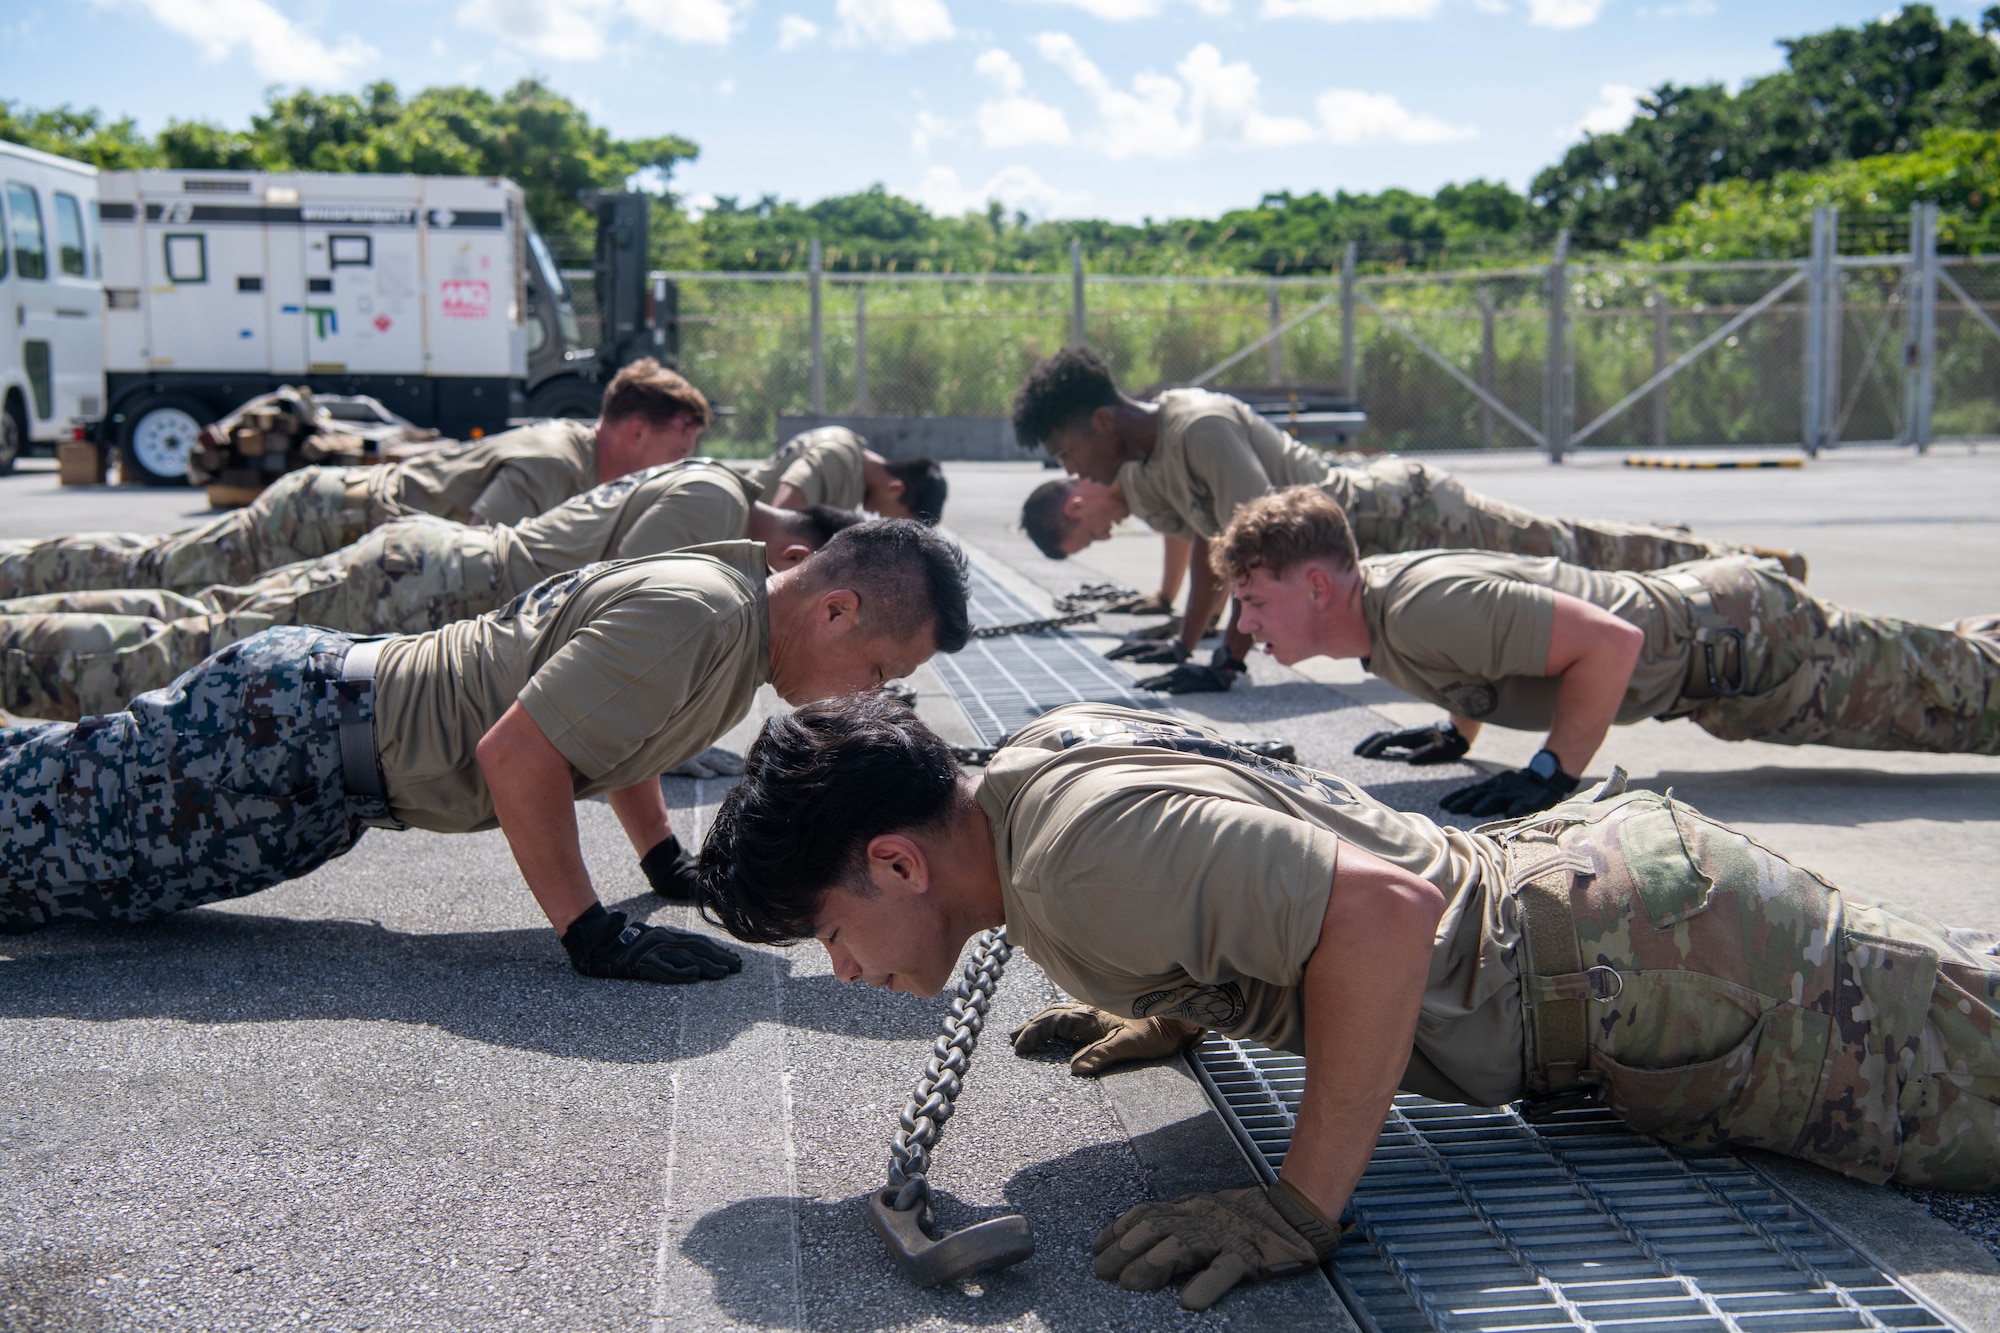 Japan Air Self-Defense Force member and 733rd Air Mobility Squadron preform push-ups for physical training